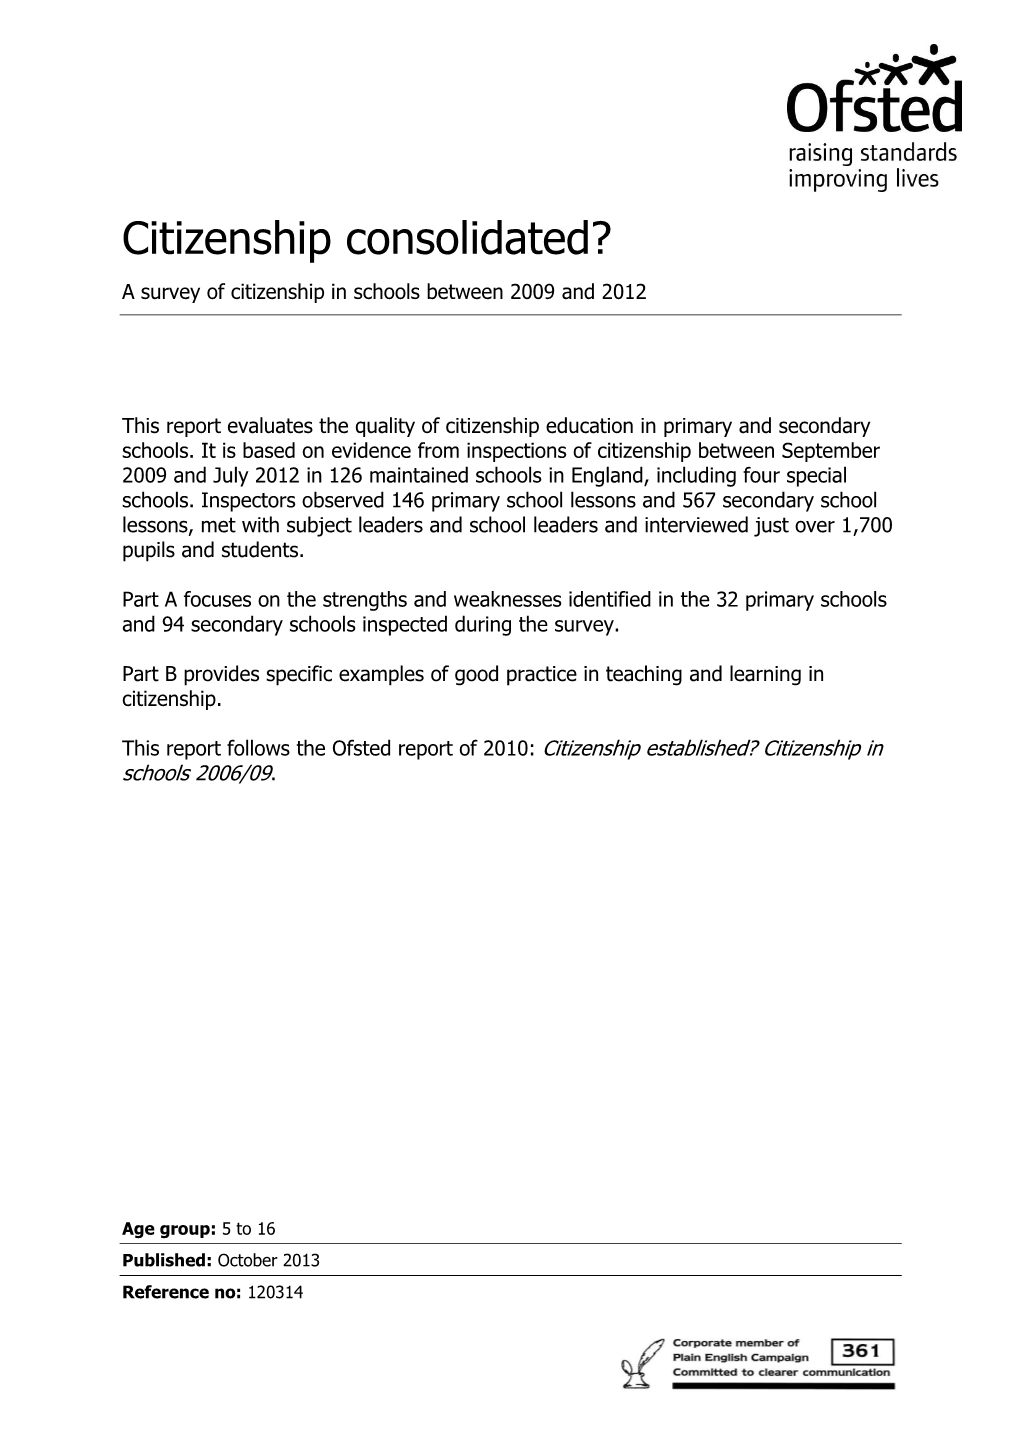 Citizenship Consolidated? a Survey of Citizenship in Schools Between 2009 and 2012